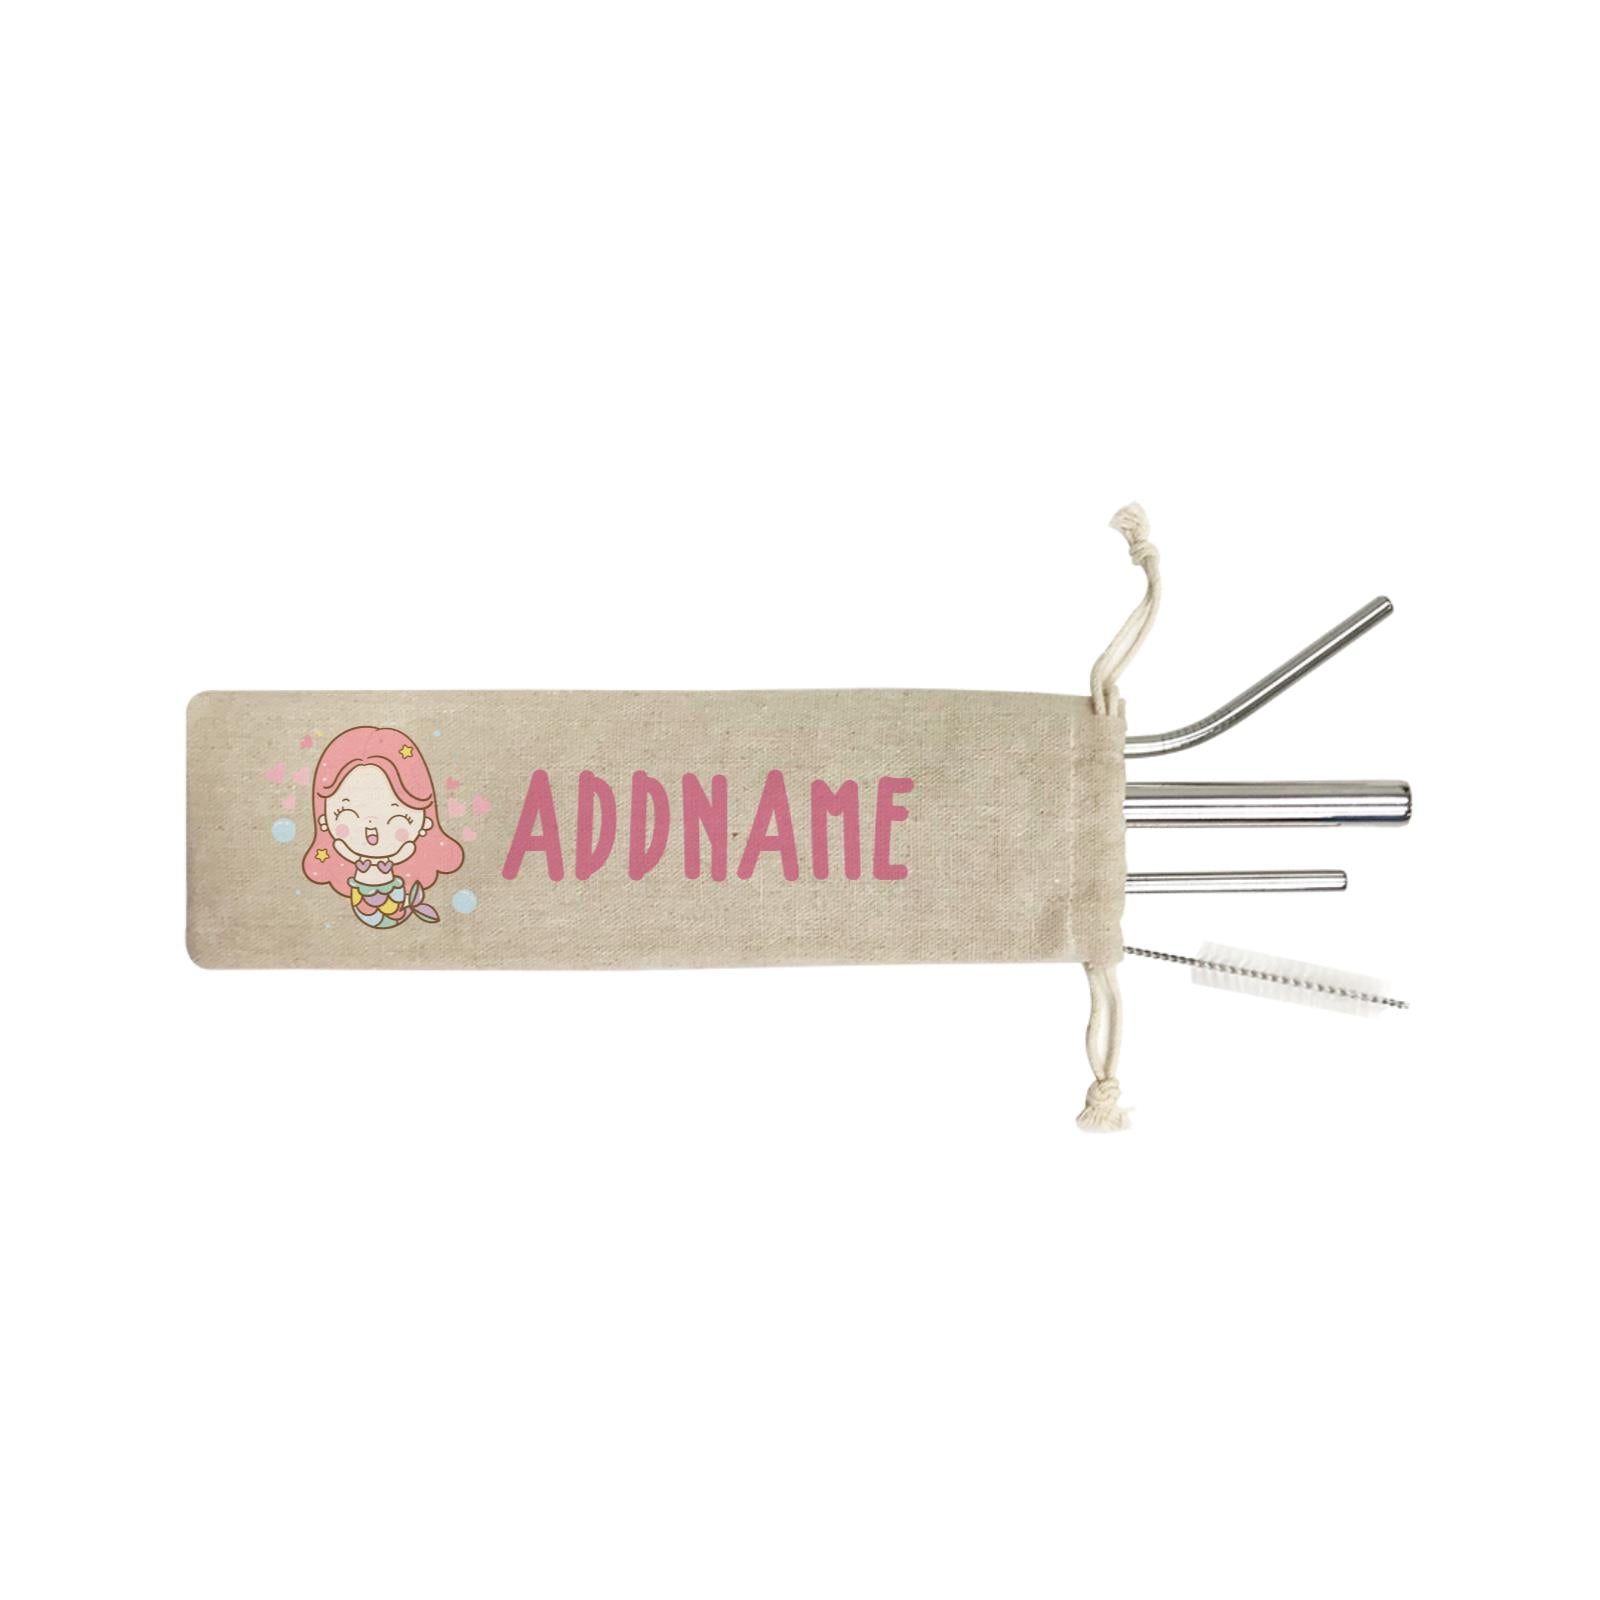 Unicorn And Princess Series Cute Happy Mermaid Girl Addname SB 4-In-1 Stainless Steel Straw Set in Satchel